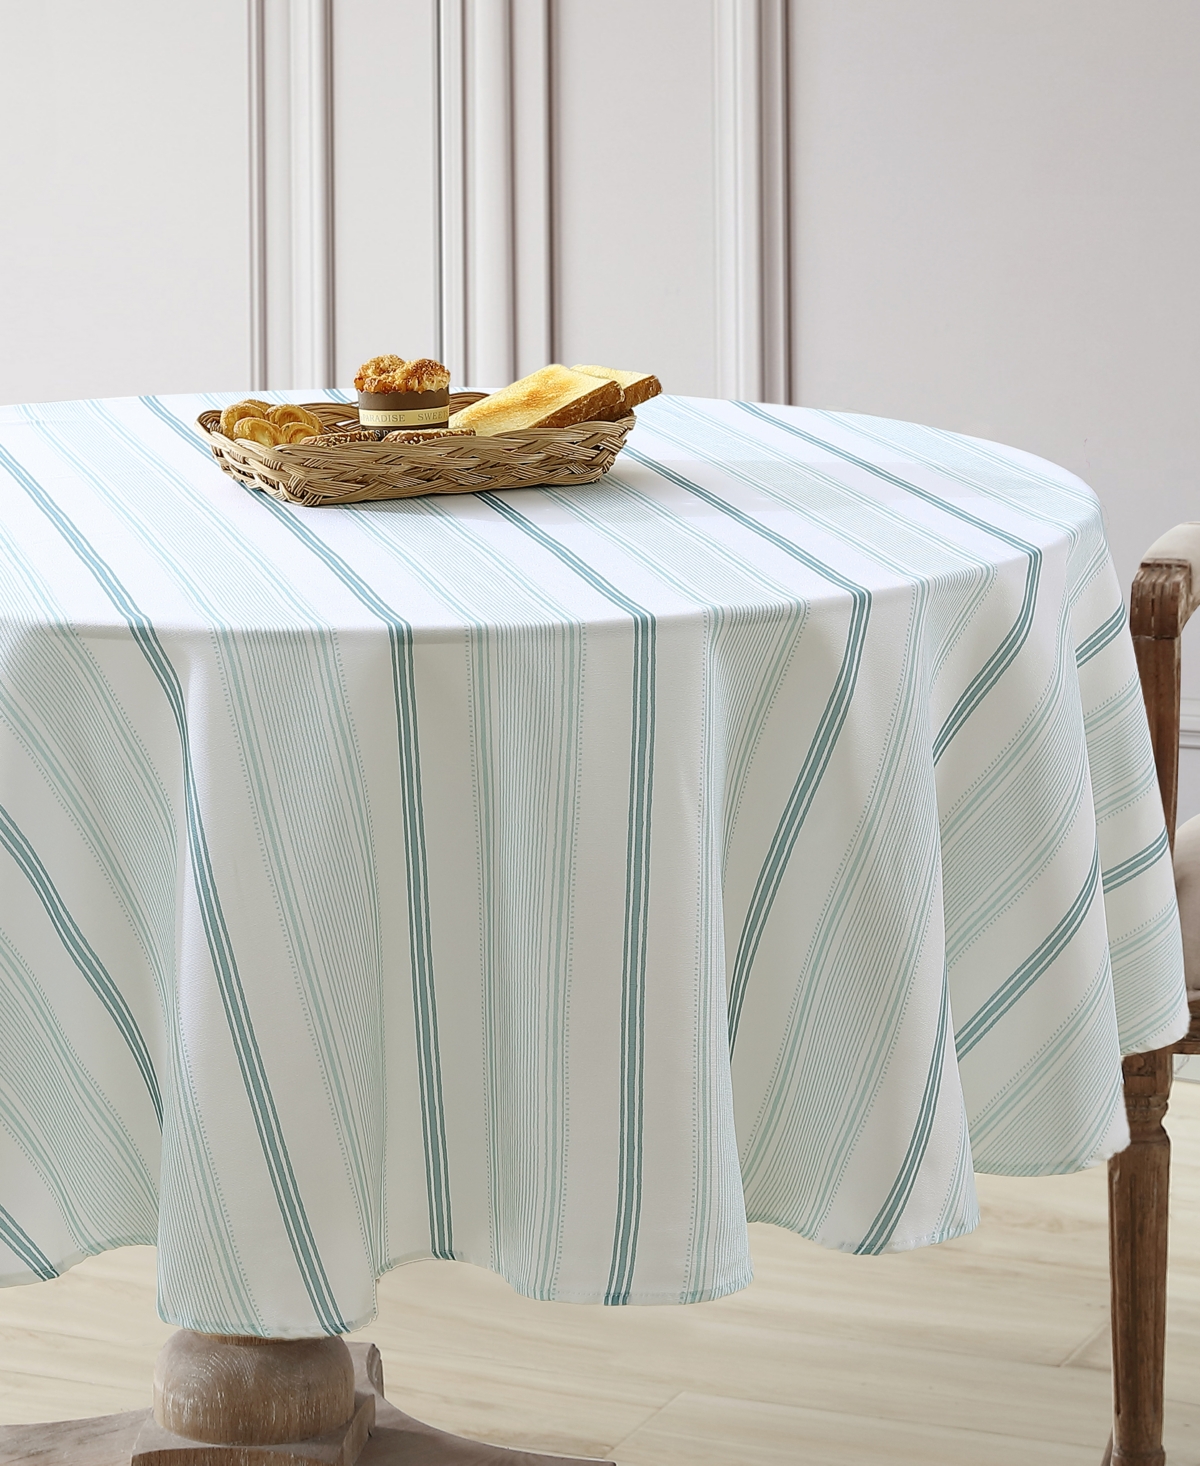 Laura Ashley Easy Care Pattern Tablecloth, 70" Round In Teal Stripe